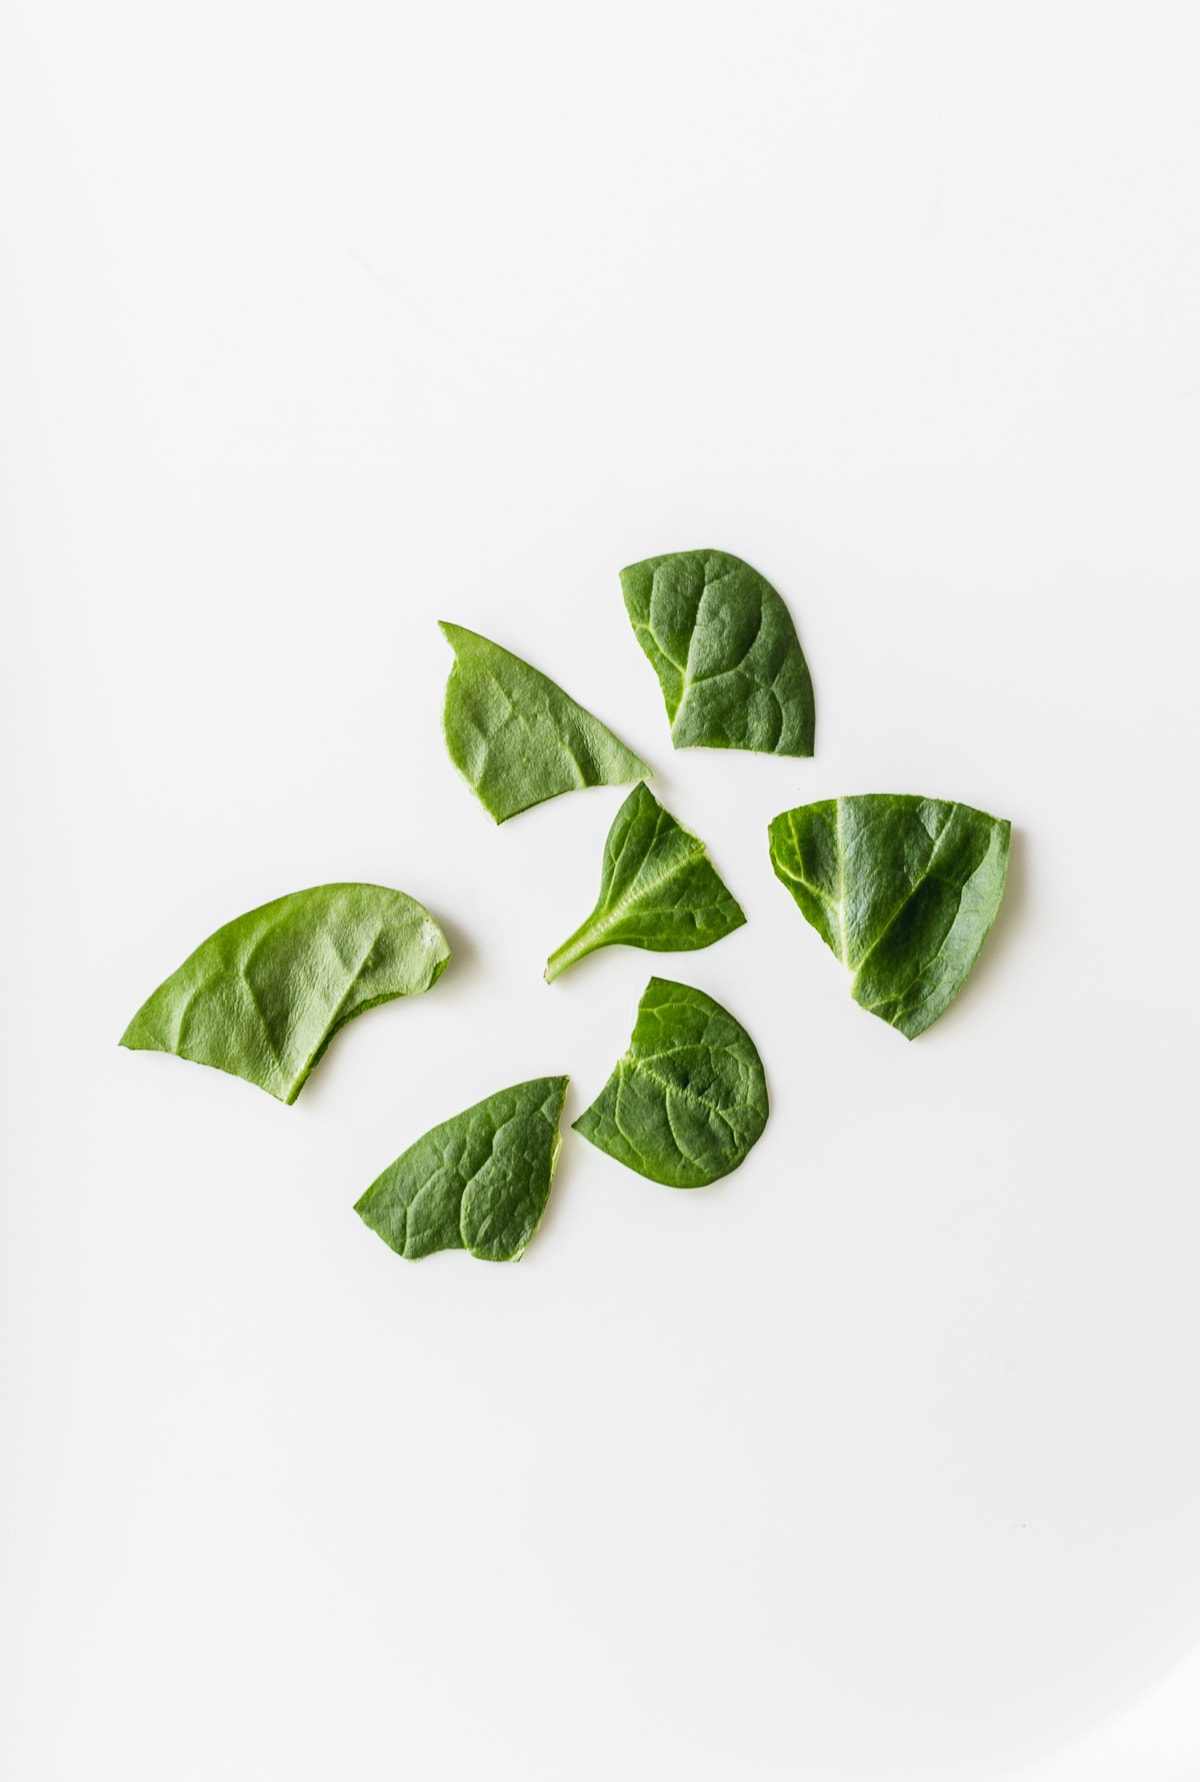 pieces of raw spinach leaves on a white background.